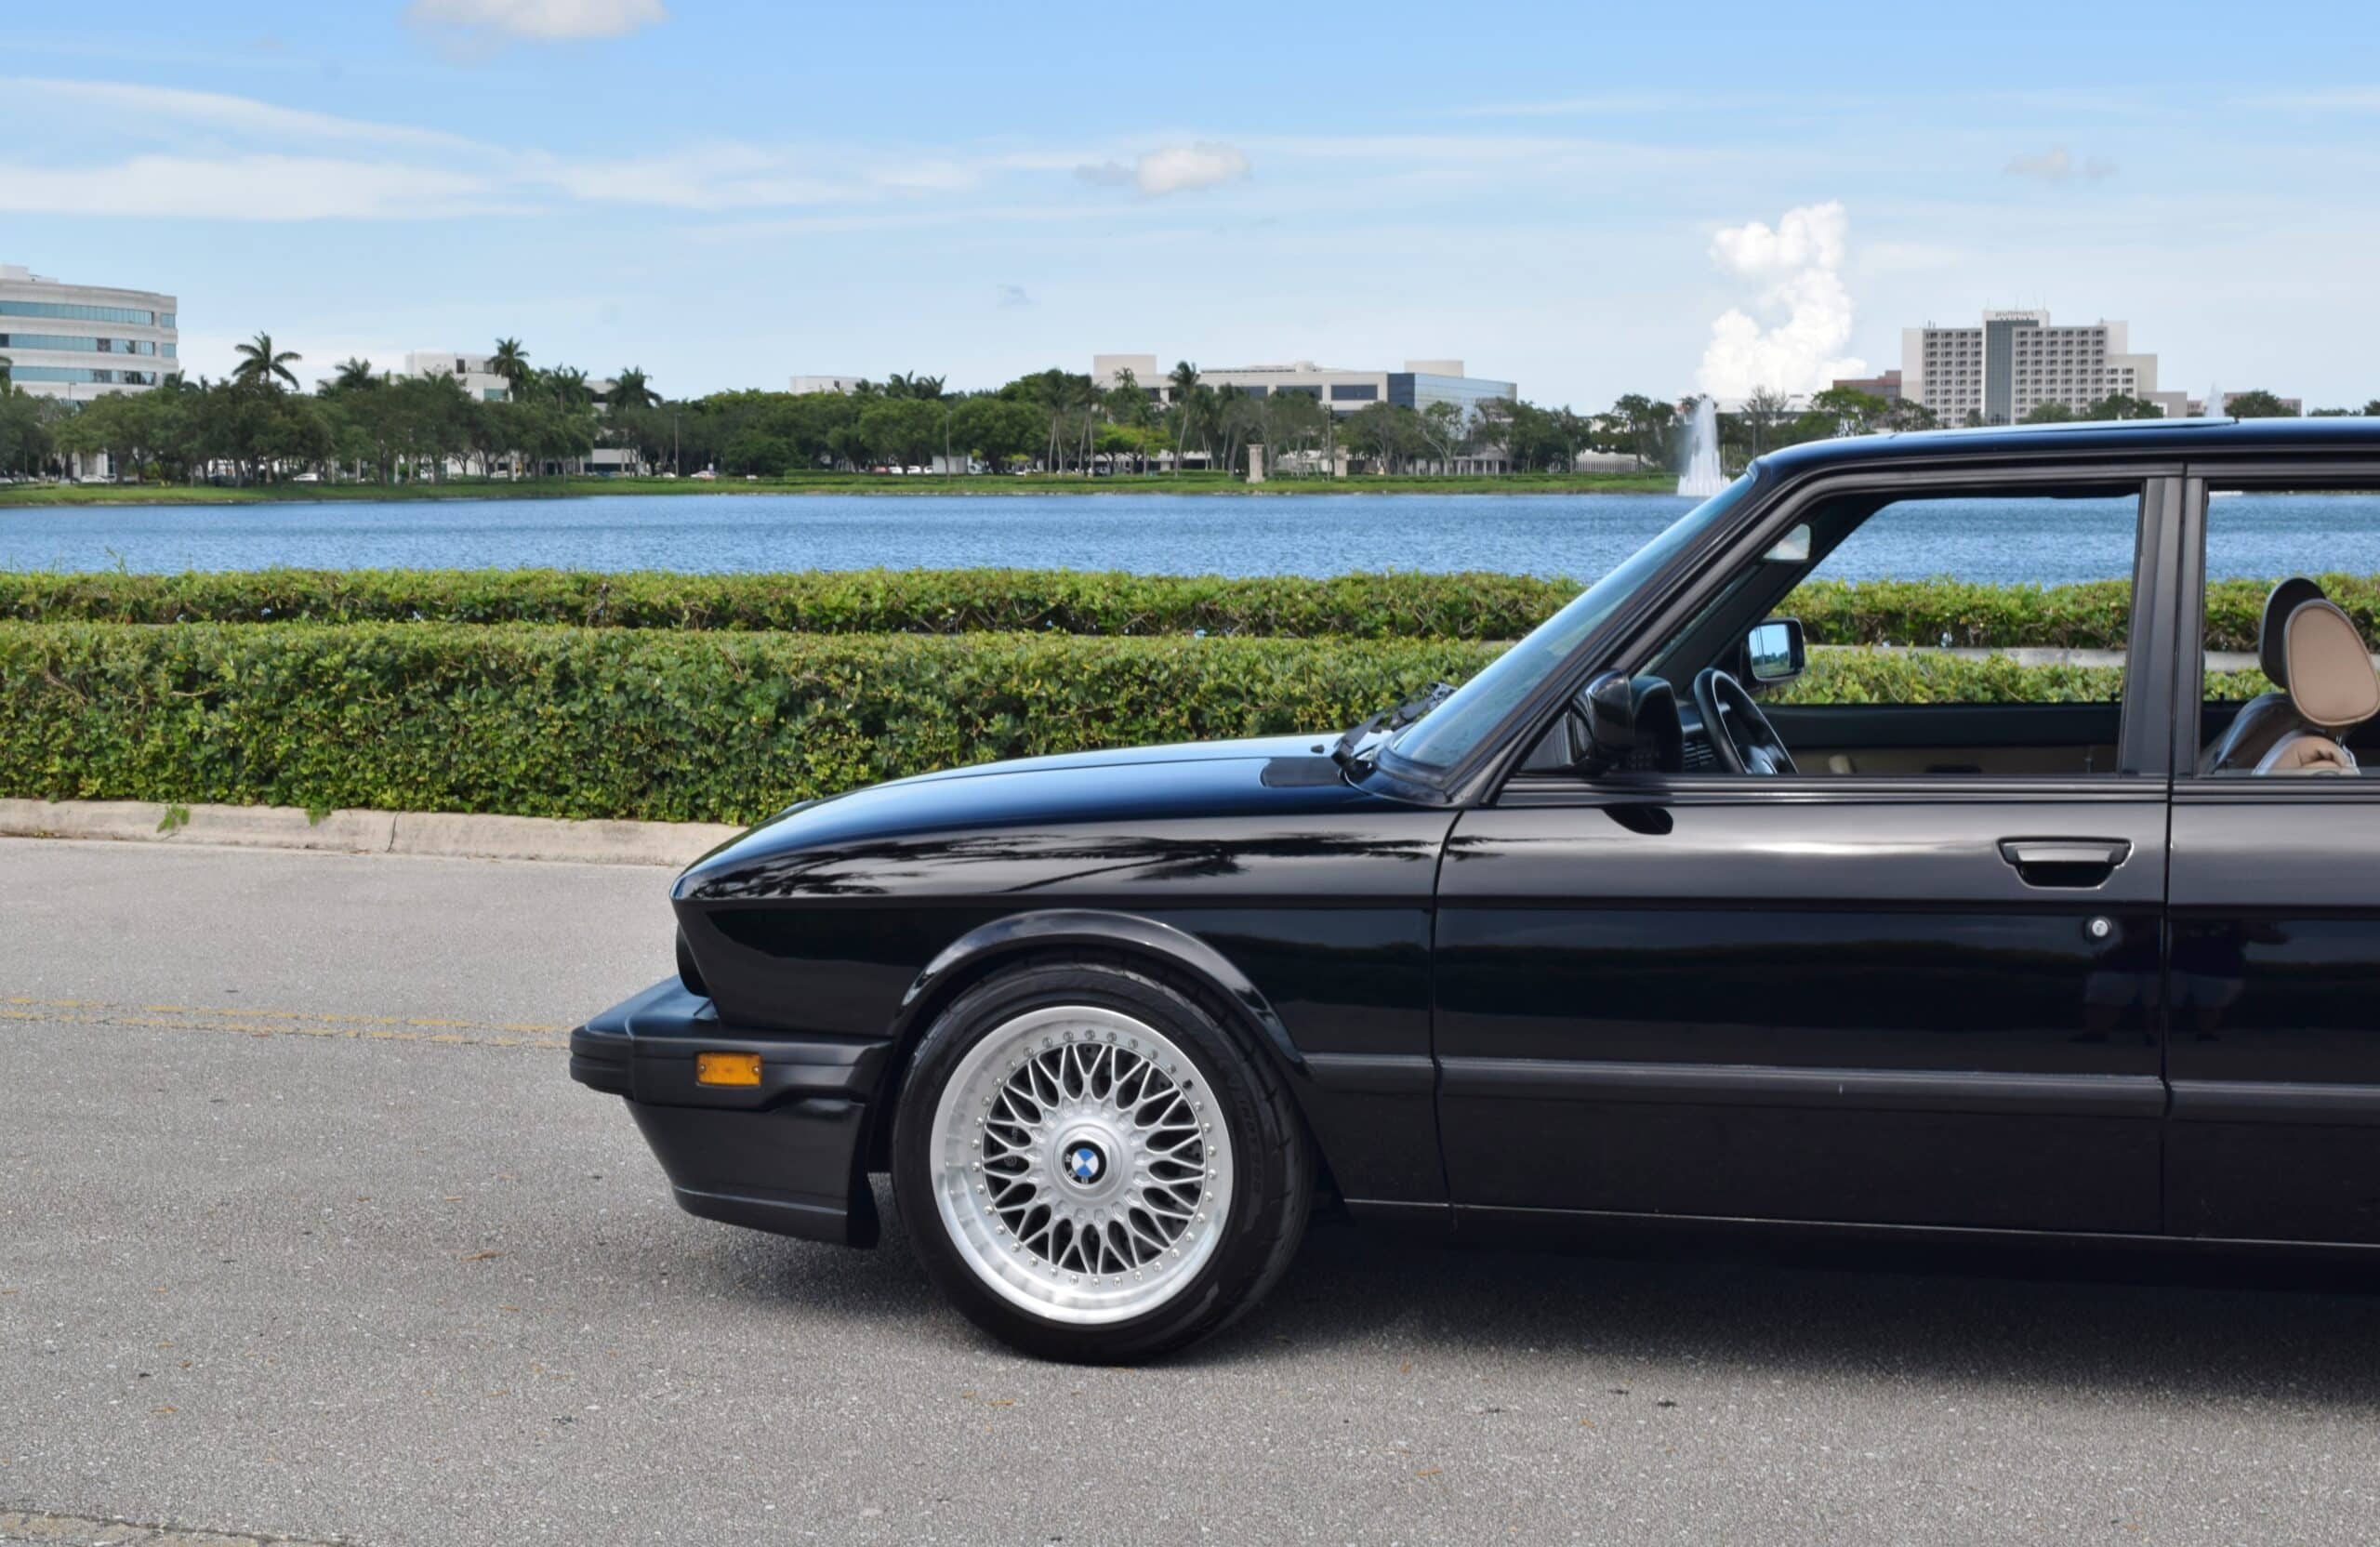 1988 BMW M5 E28 Well Sorted-California Car-Brembo Big Brakes -Full Service History- No Accidents